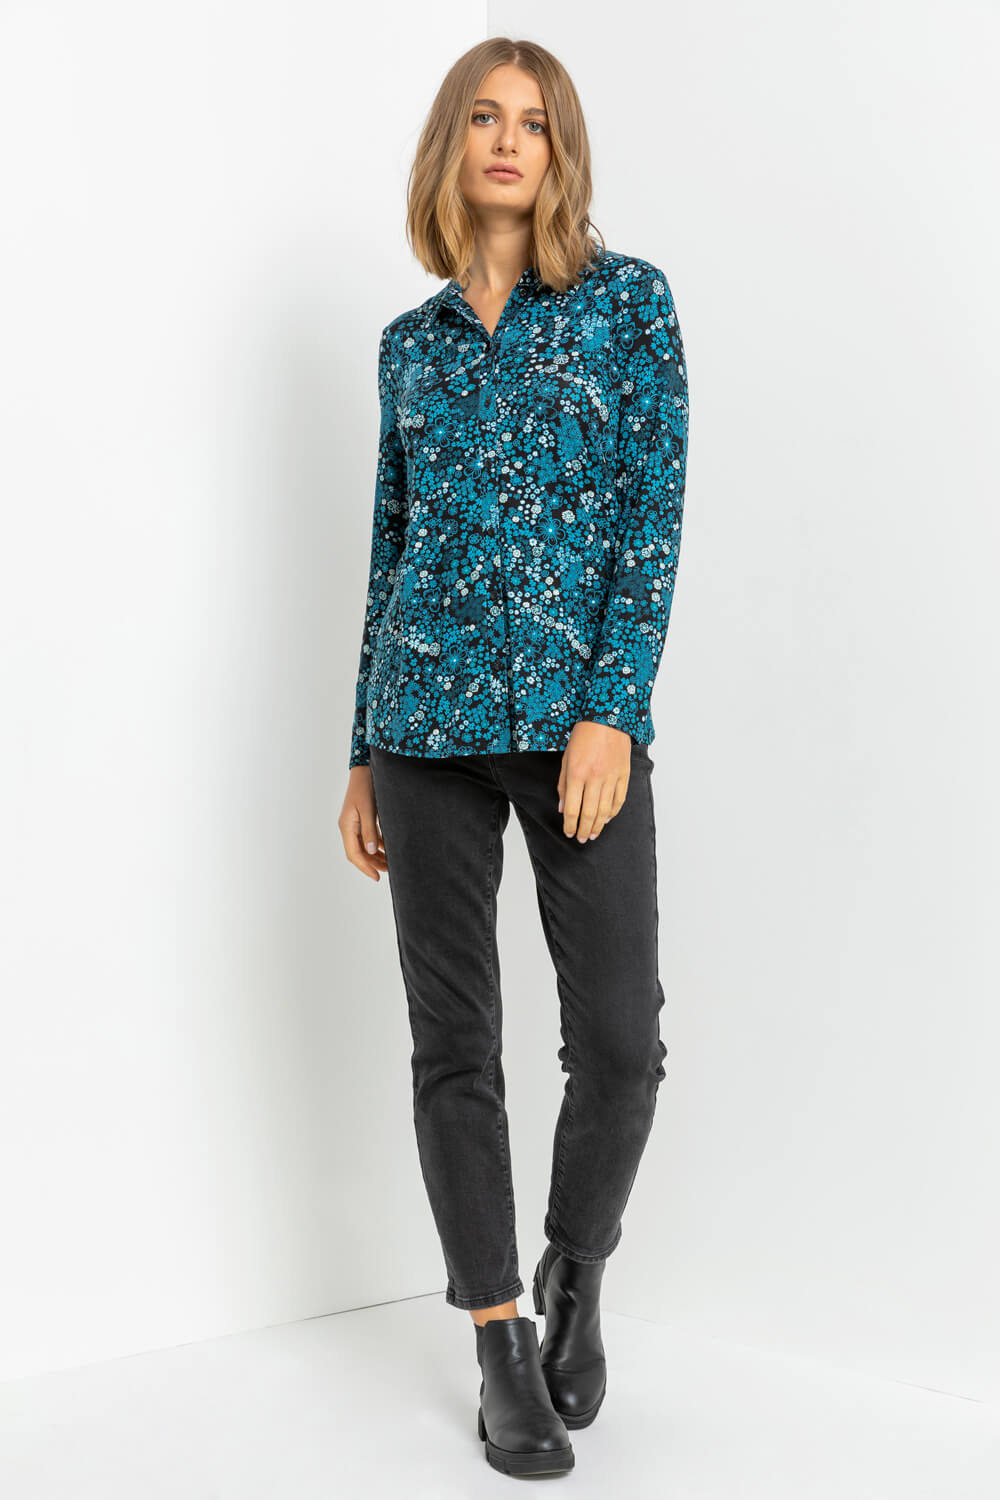 Teal Contrast Floral Print Long Sleeve Jersey Shirt, Image 3 of 4